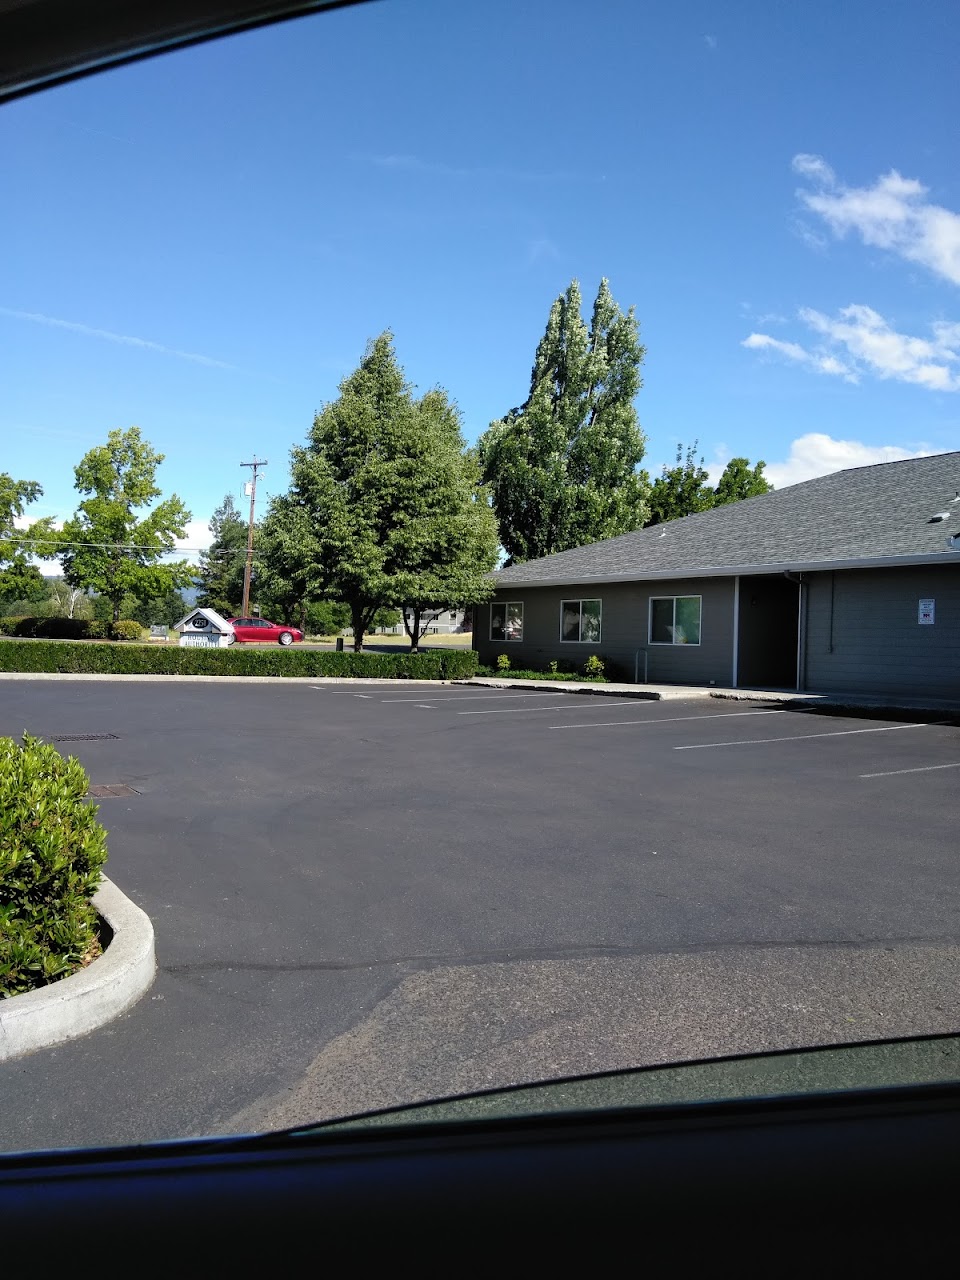 Photo of Housing Authority of Jackson County. Affordable housing located at 2251 Table Rock Road MEDFORD, OR 97501